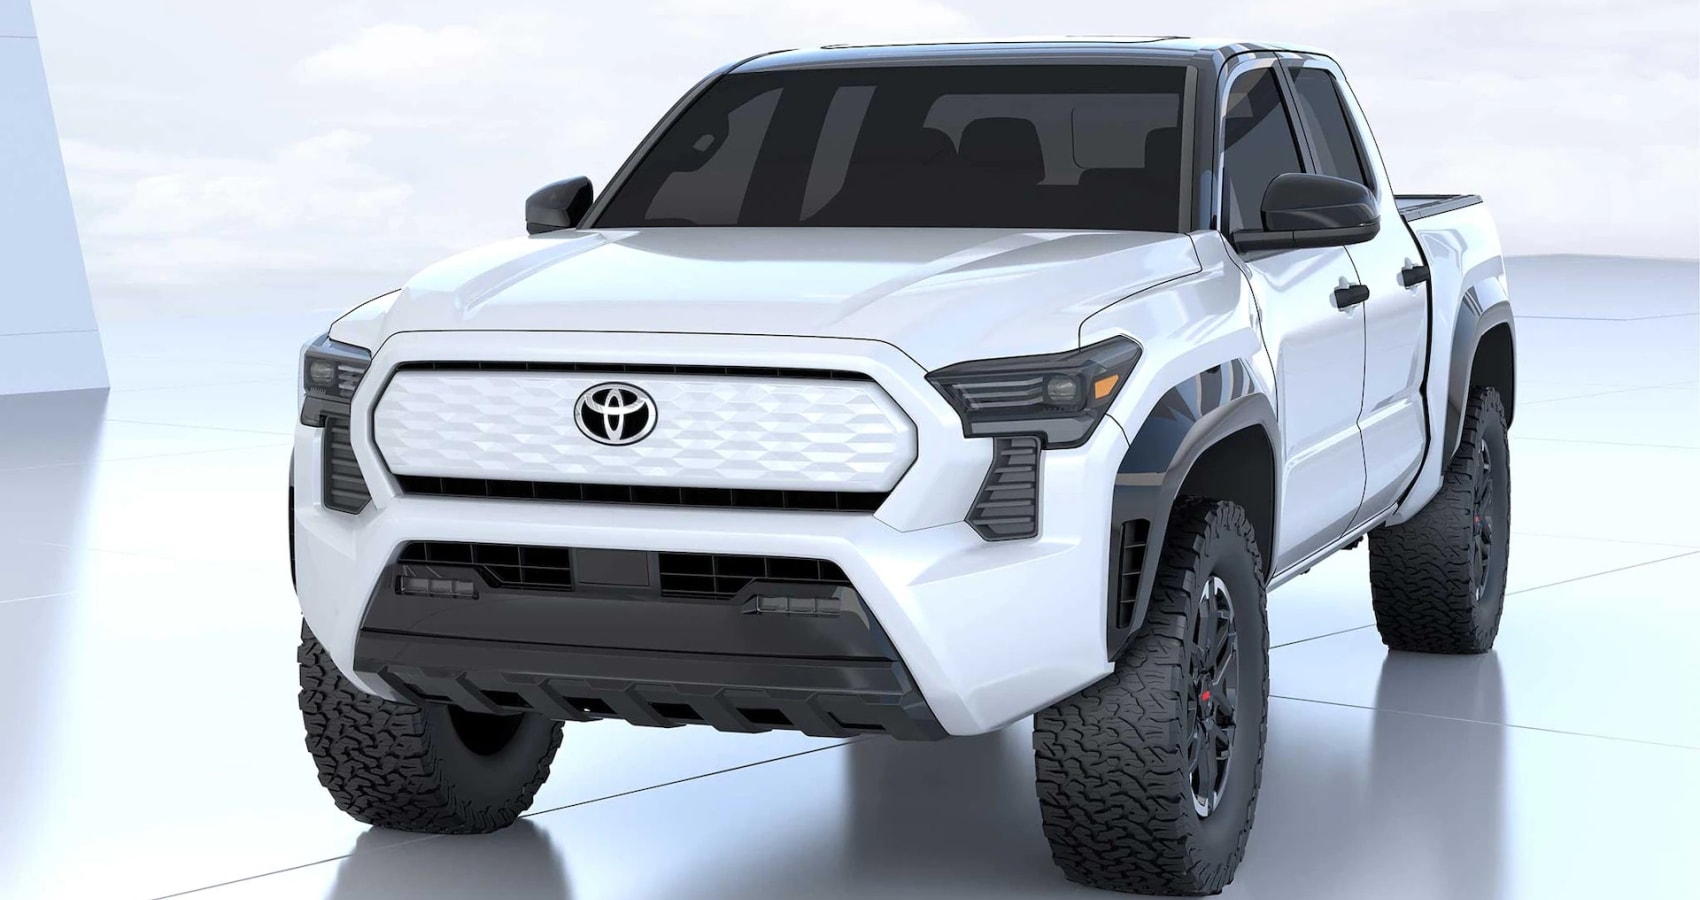 Here's How the 2021 Toyota Hilux Differs From the Tacoma